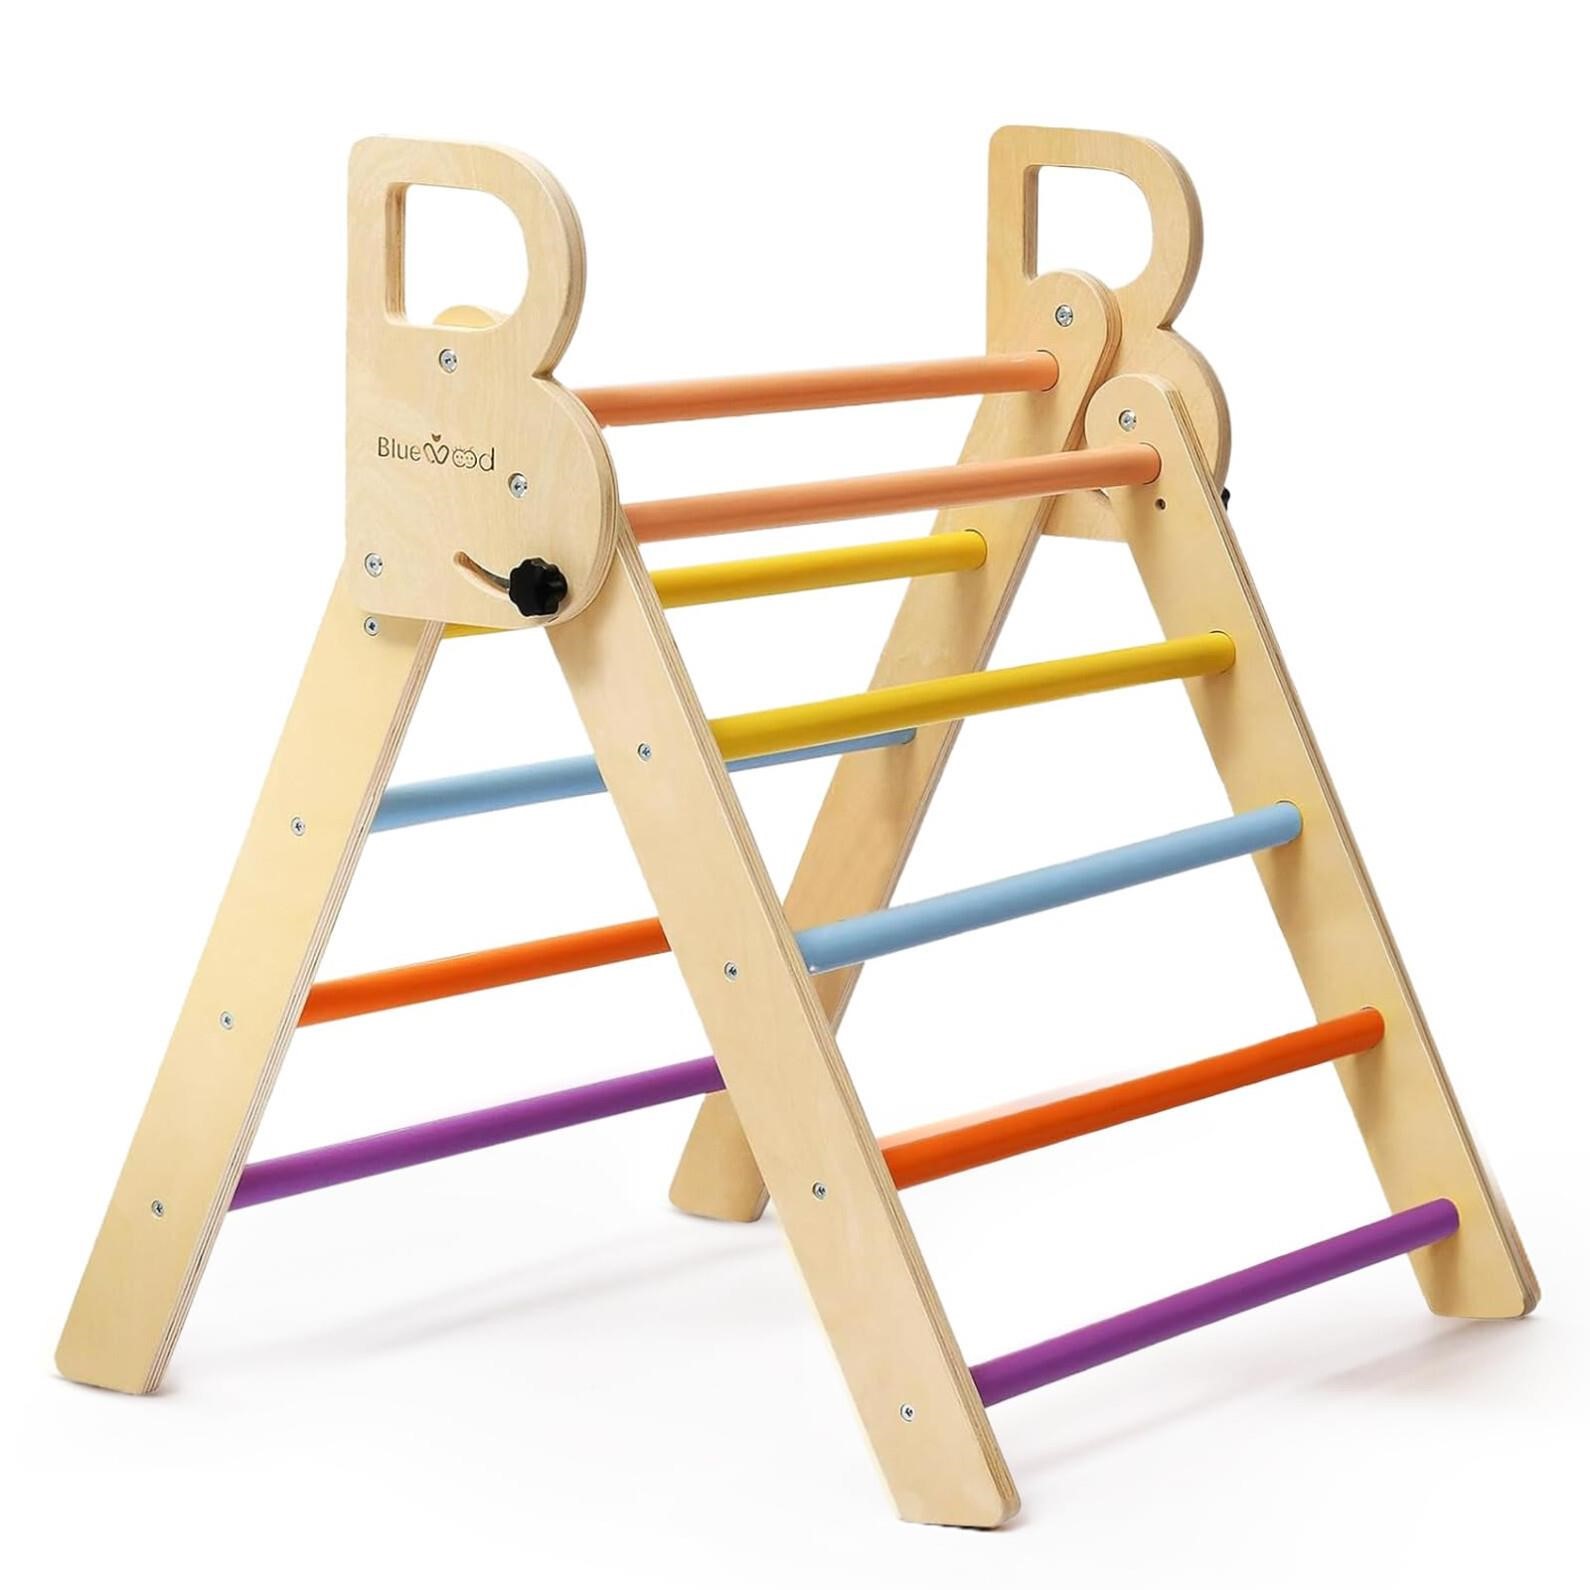 BlueWood Flodable Triangle Ladder Climbing Toy for